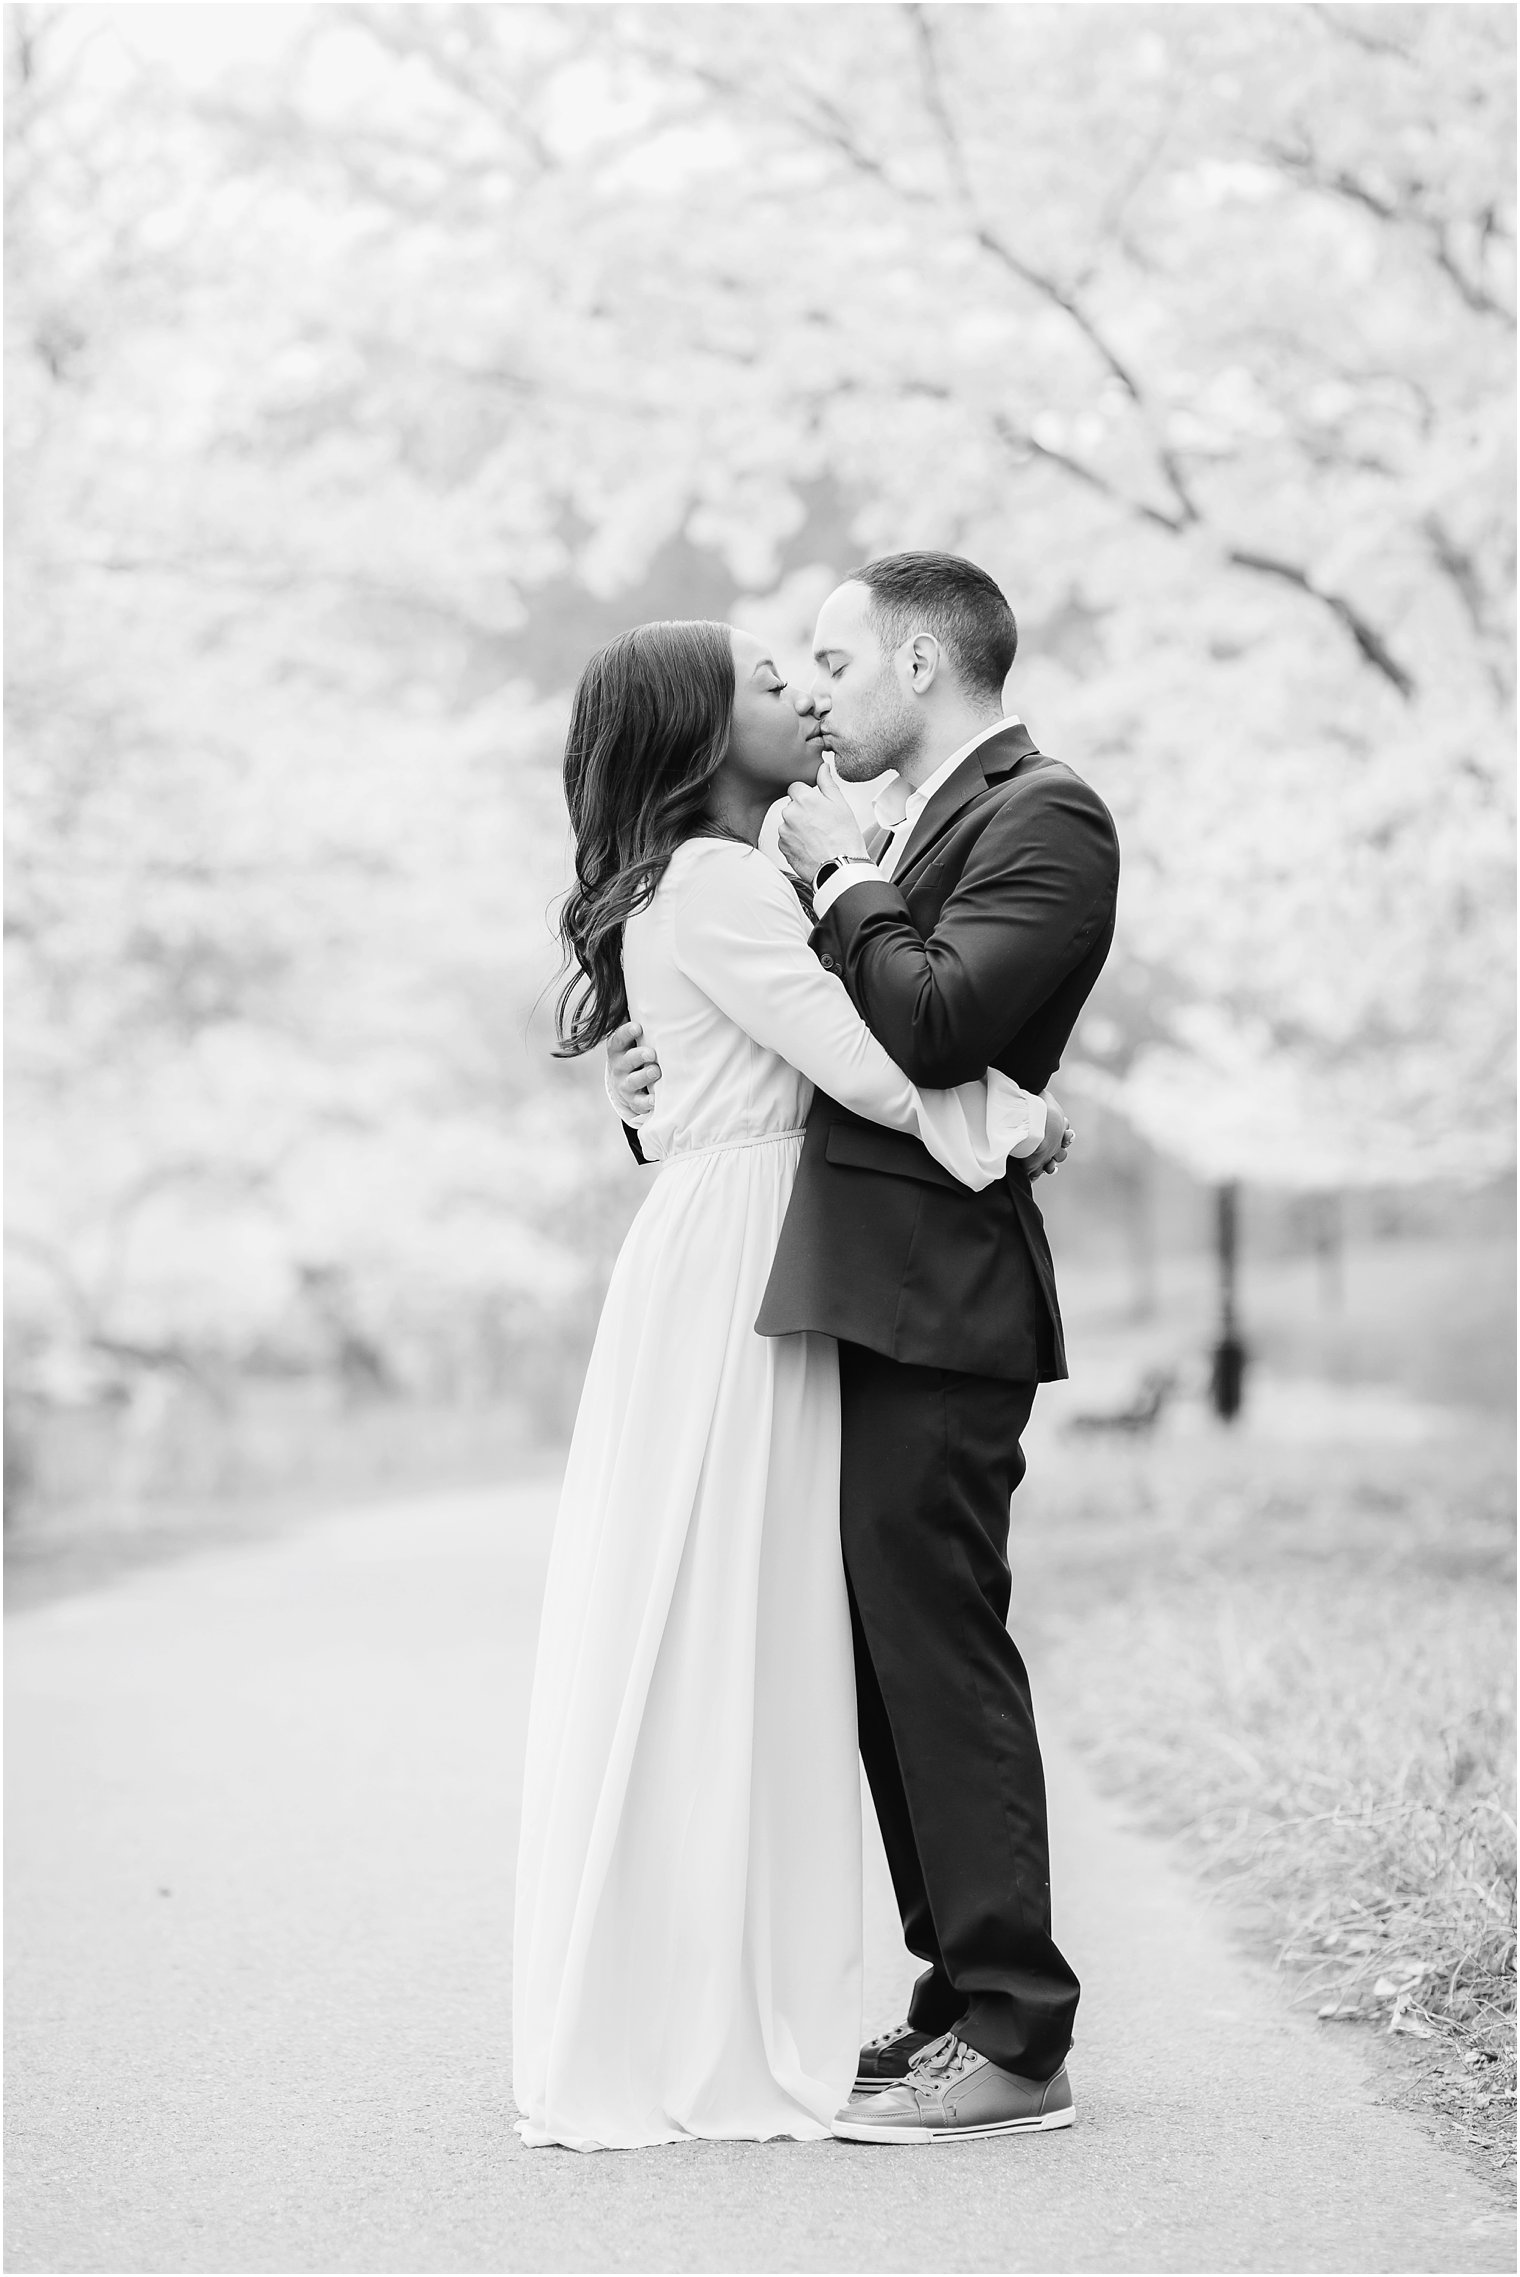 romantic kiss photo in black and white